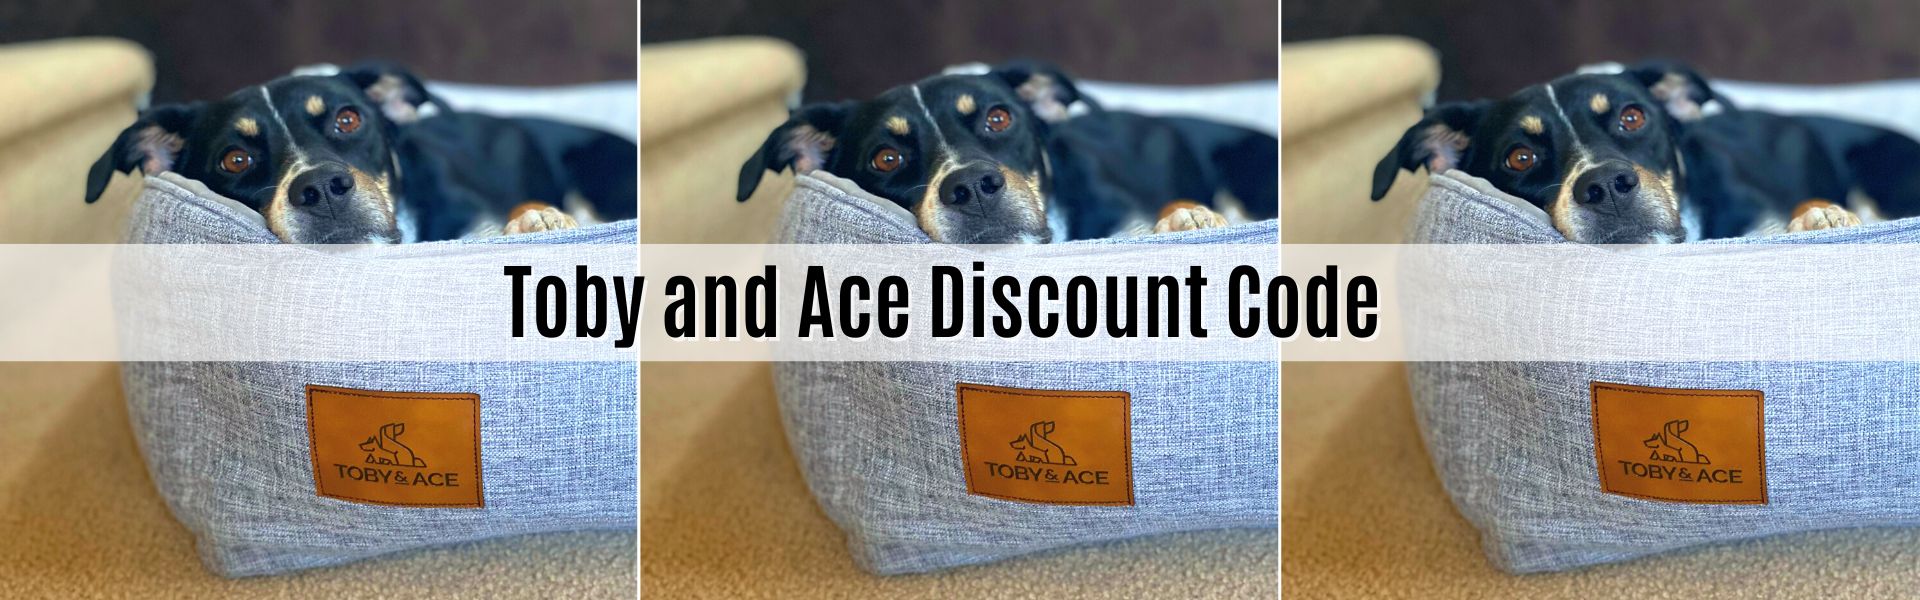 toby and ace discount code